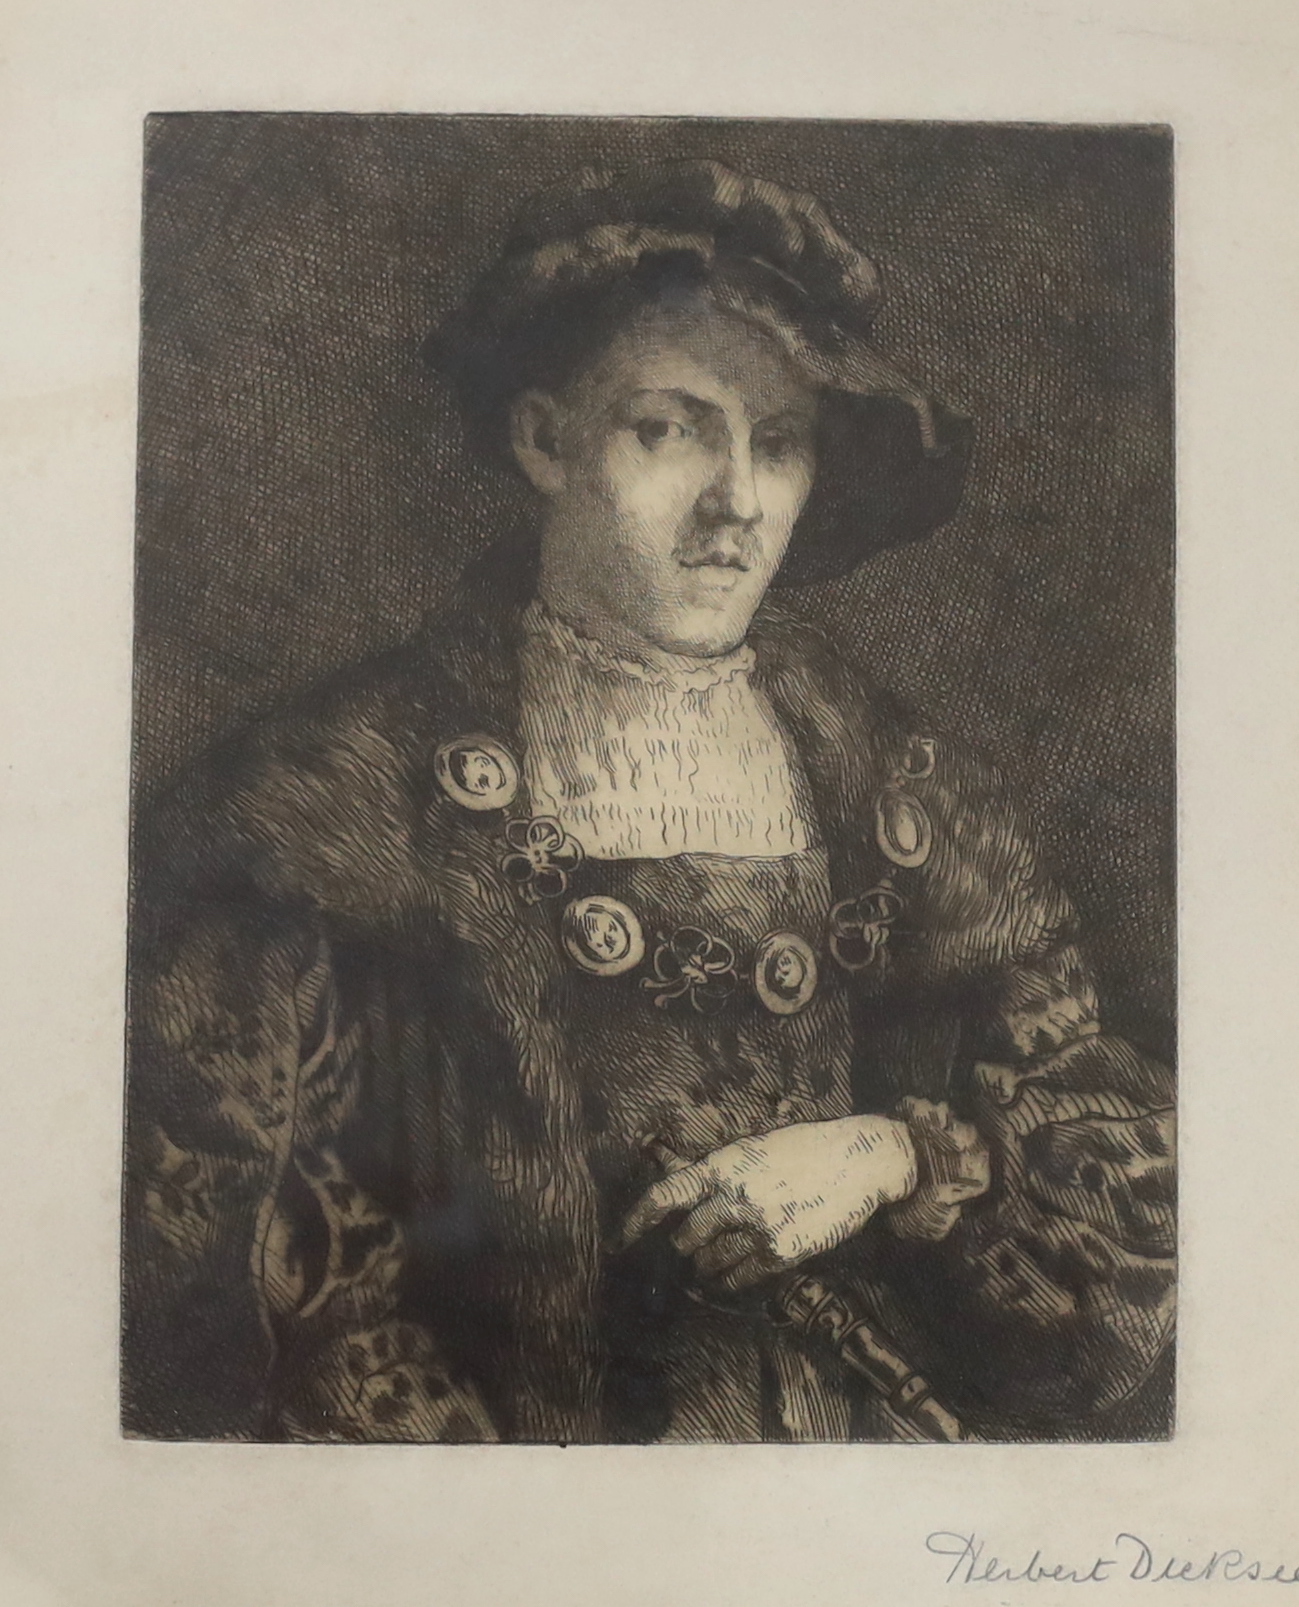 Herbert Dicksee (1862-1942), etching, The Young Noble (early self portrait of Herbert Dicksee in fancy dress in 1884), signed in pencil, 25 x 21cm